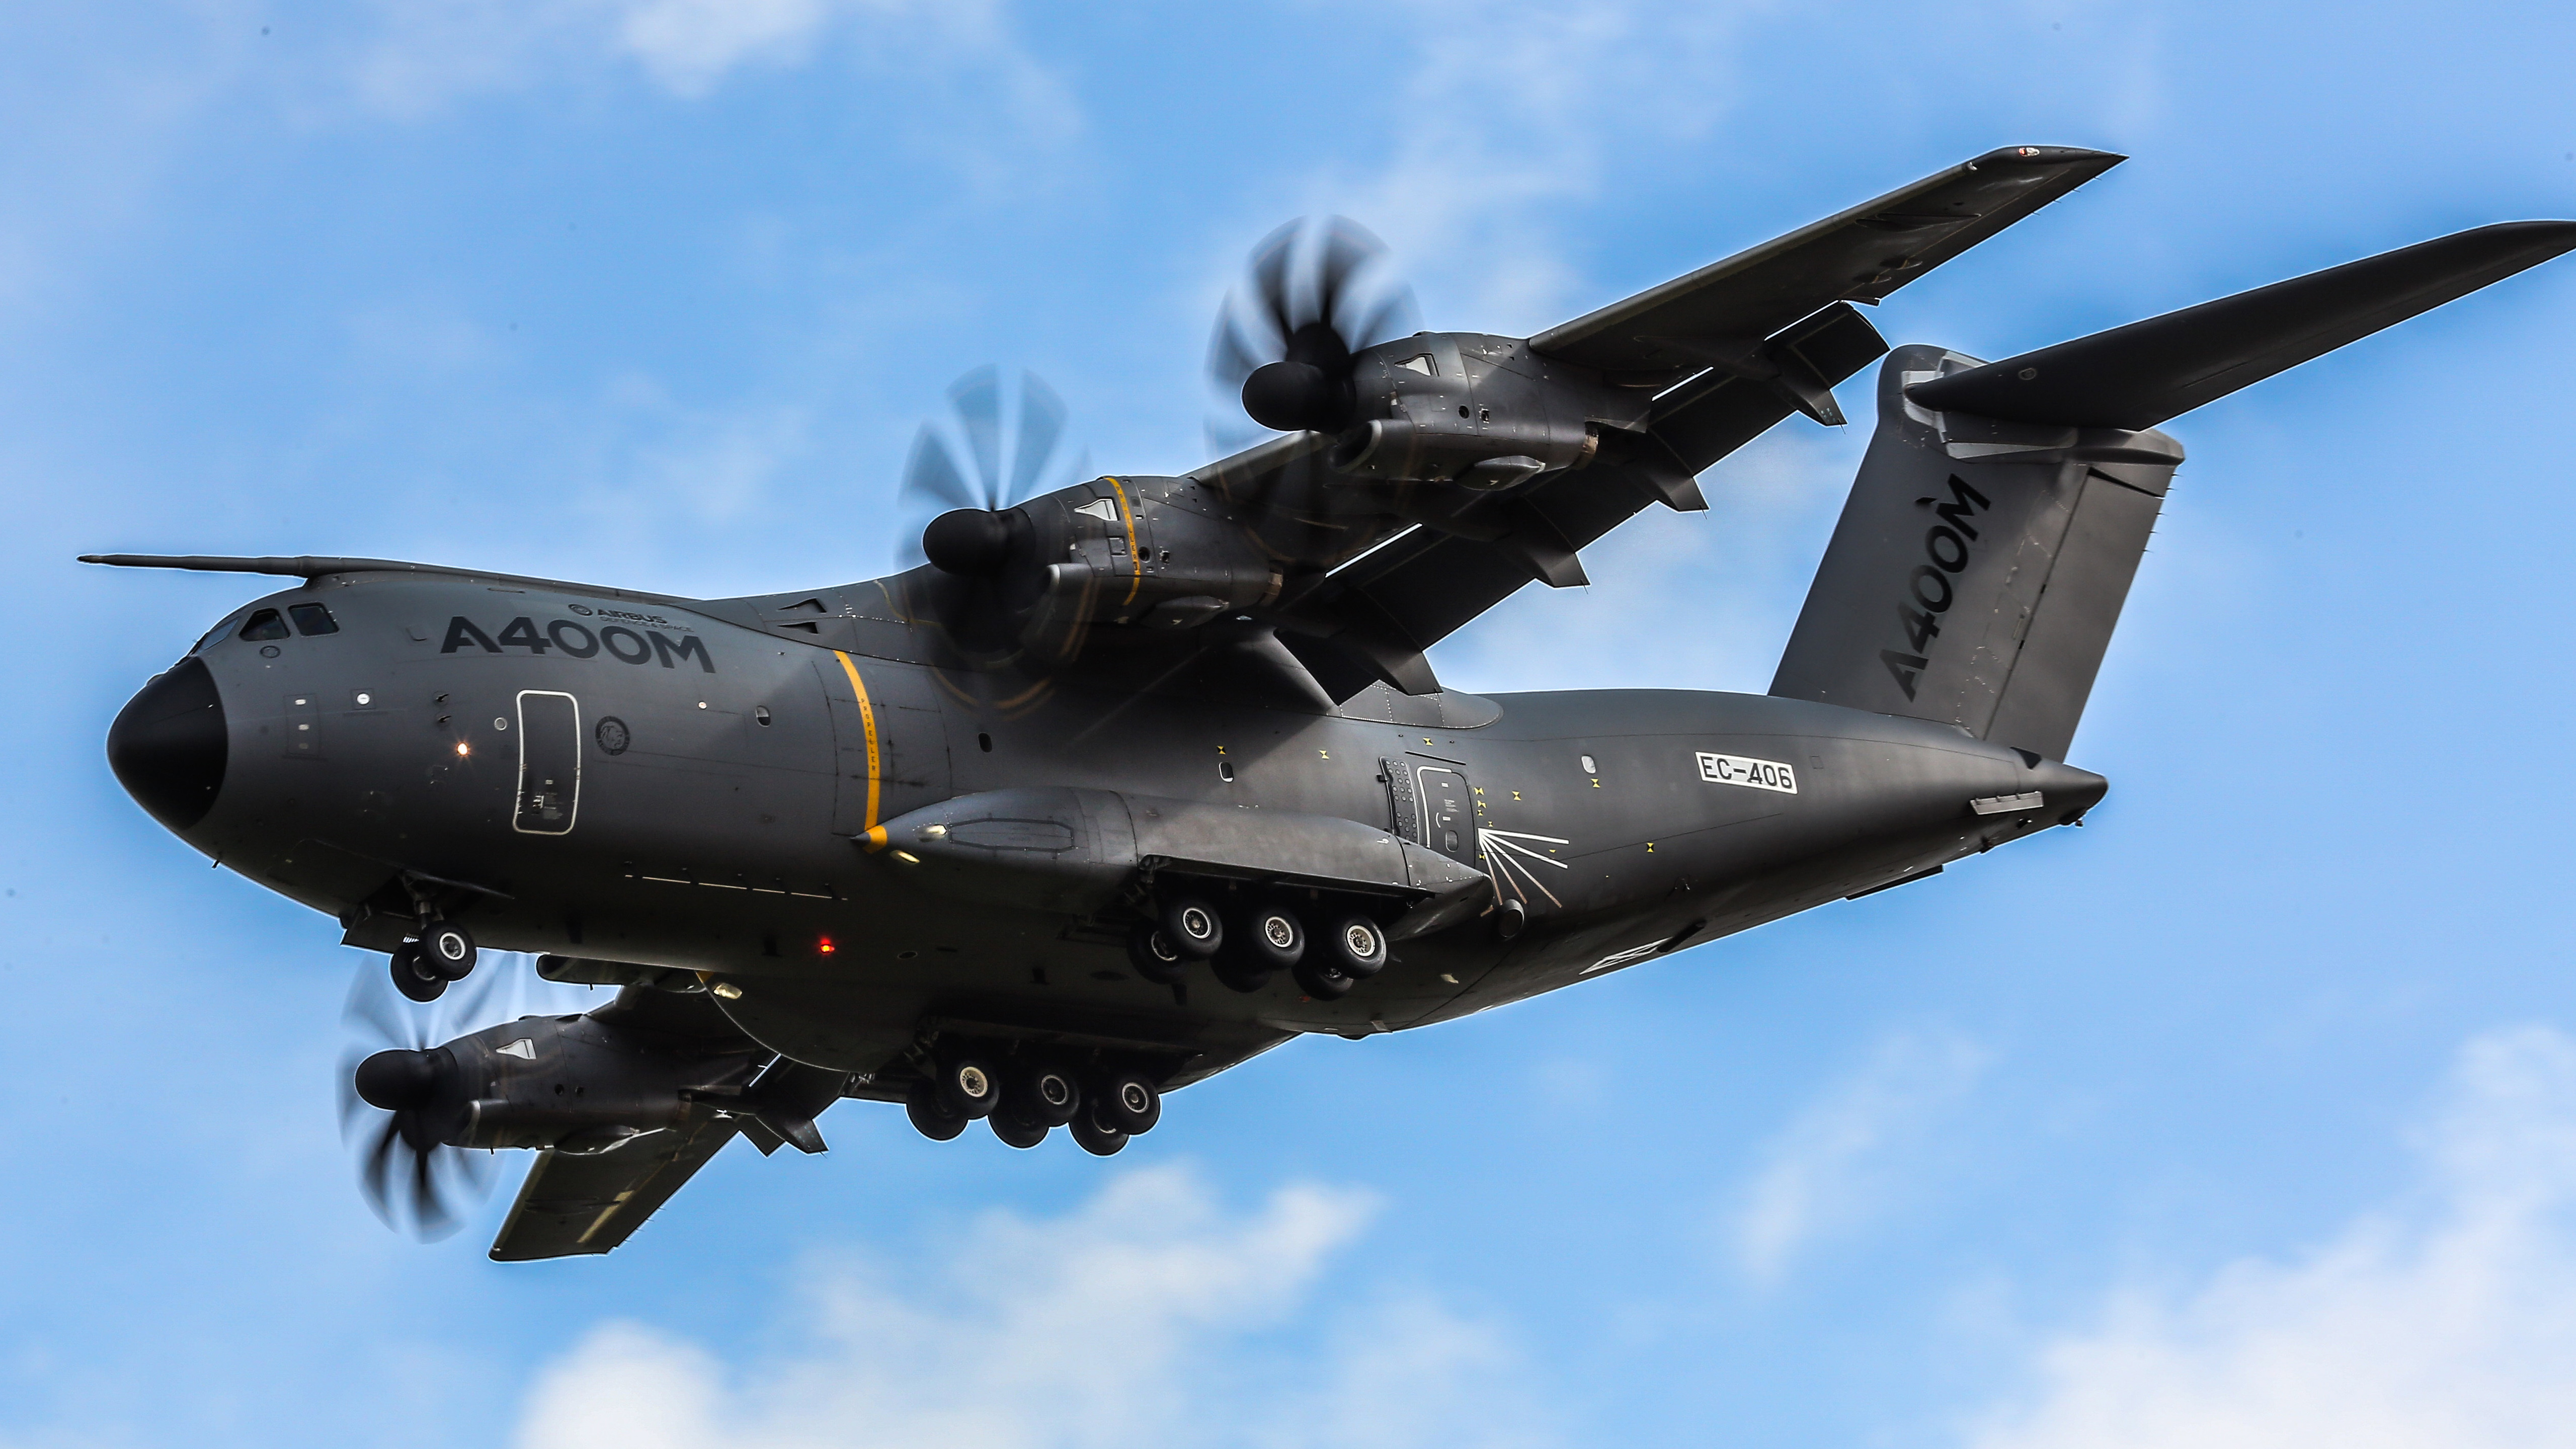 Airbus A400m Atlas Military Transport Aircraft - Airbus A400m , HD Wallpaper & Backgrounds